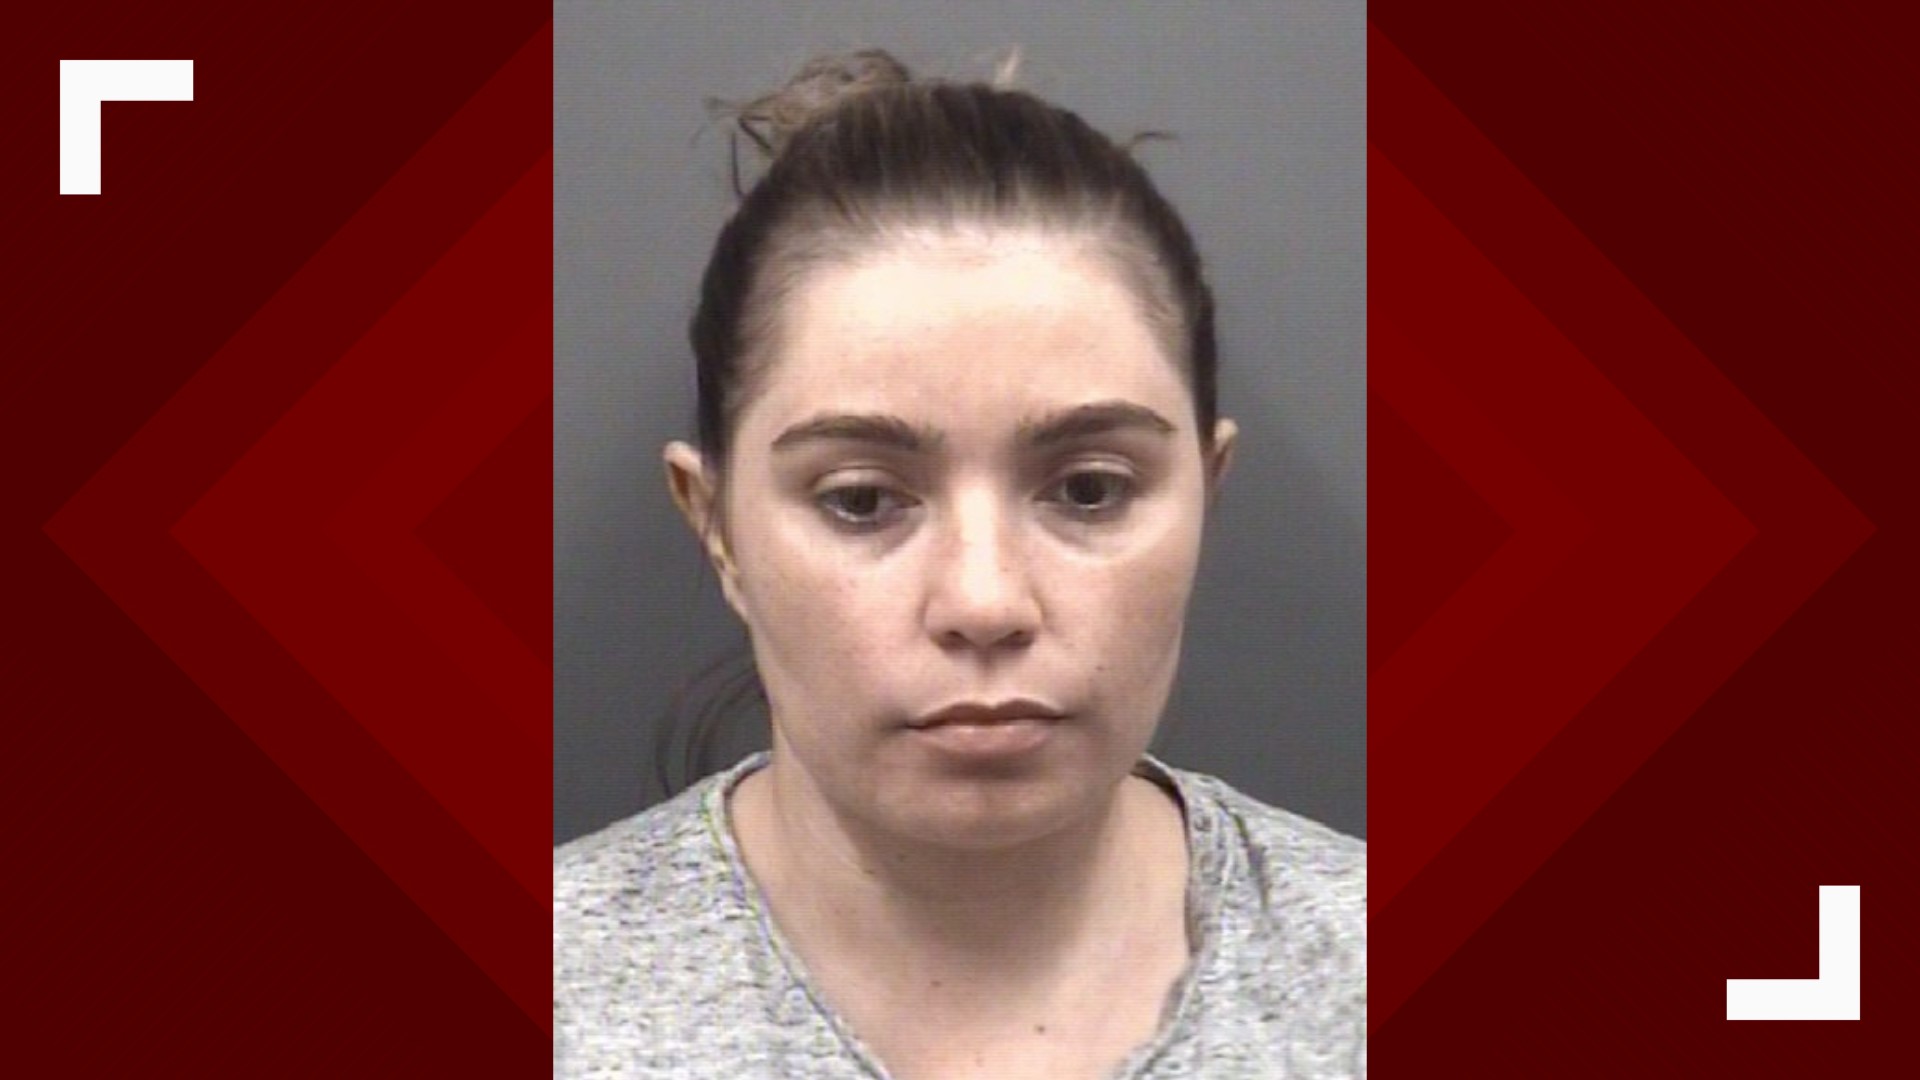 Rowan County Deputies say she stated she wanted to make her fiance sick so she could leave with their baby without him interfering.